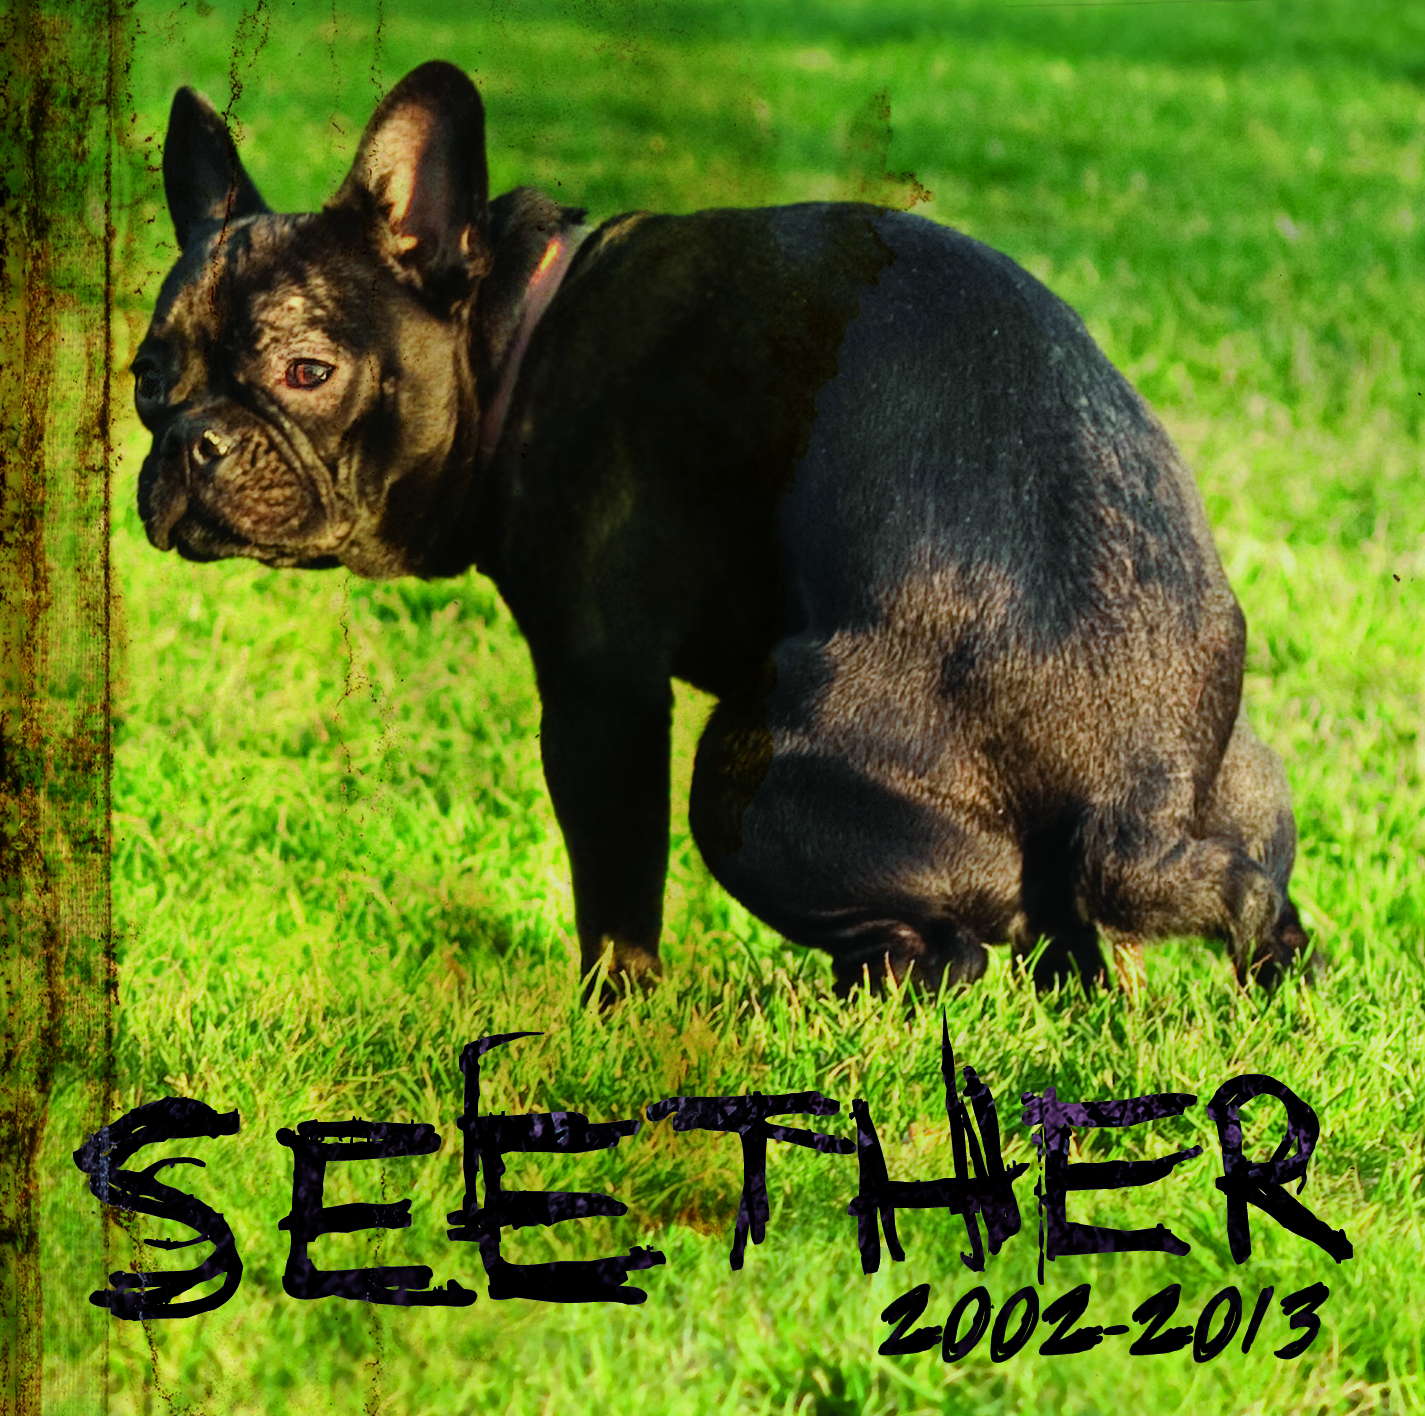 Seether - Seether: 2002 - 2013 - 2xCD